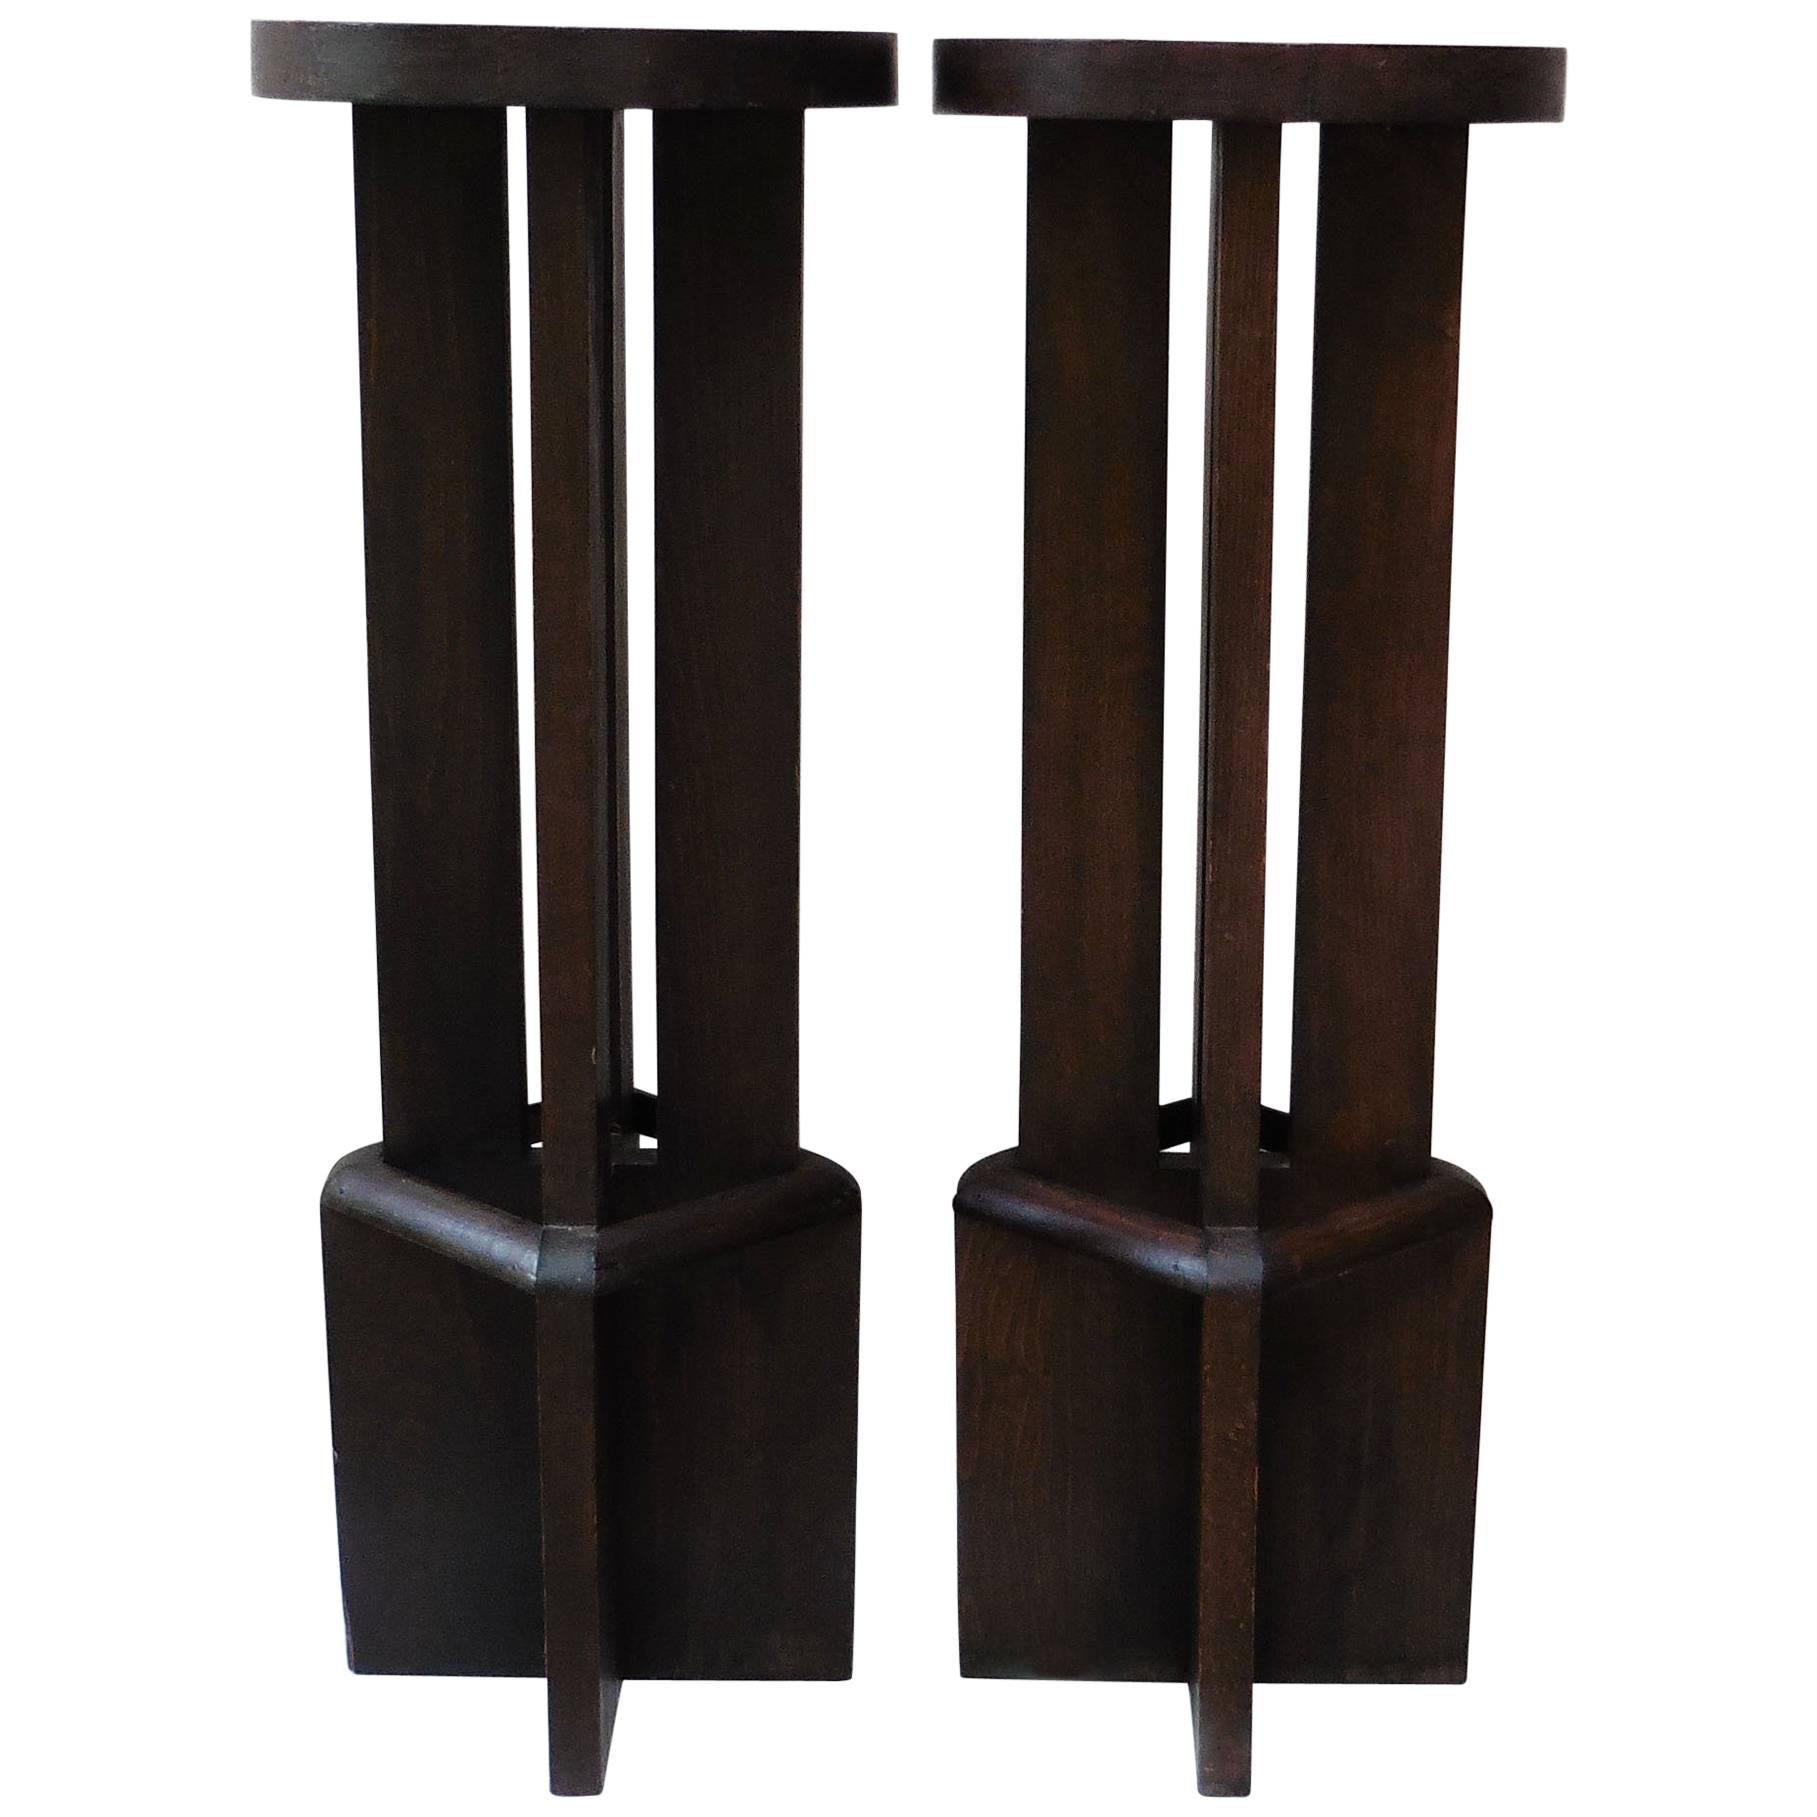 Pair of Art Deco Wood Geometrical Plant Stands